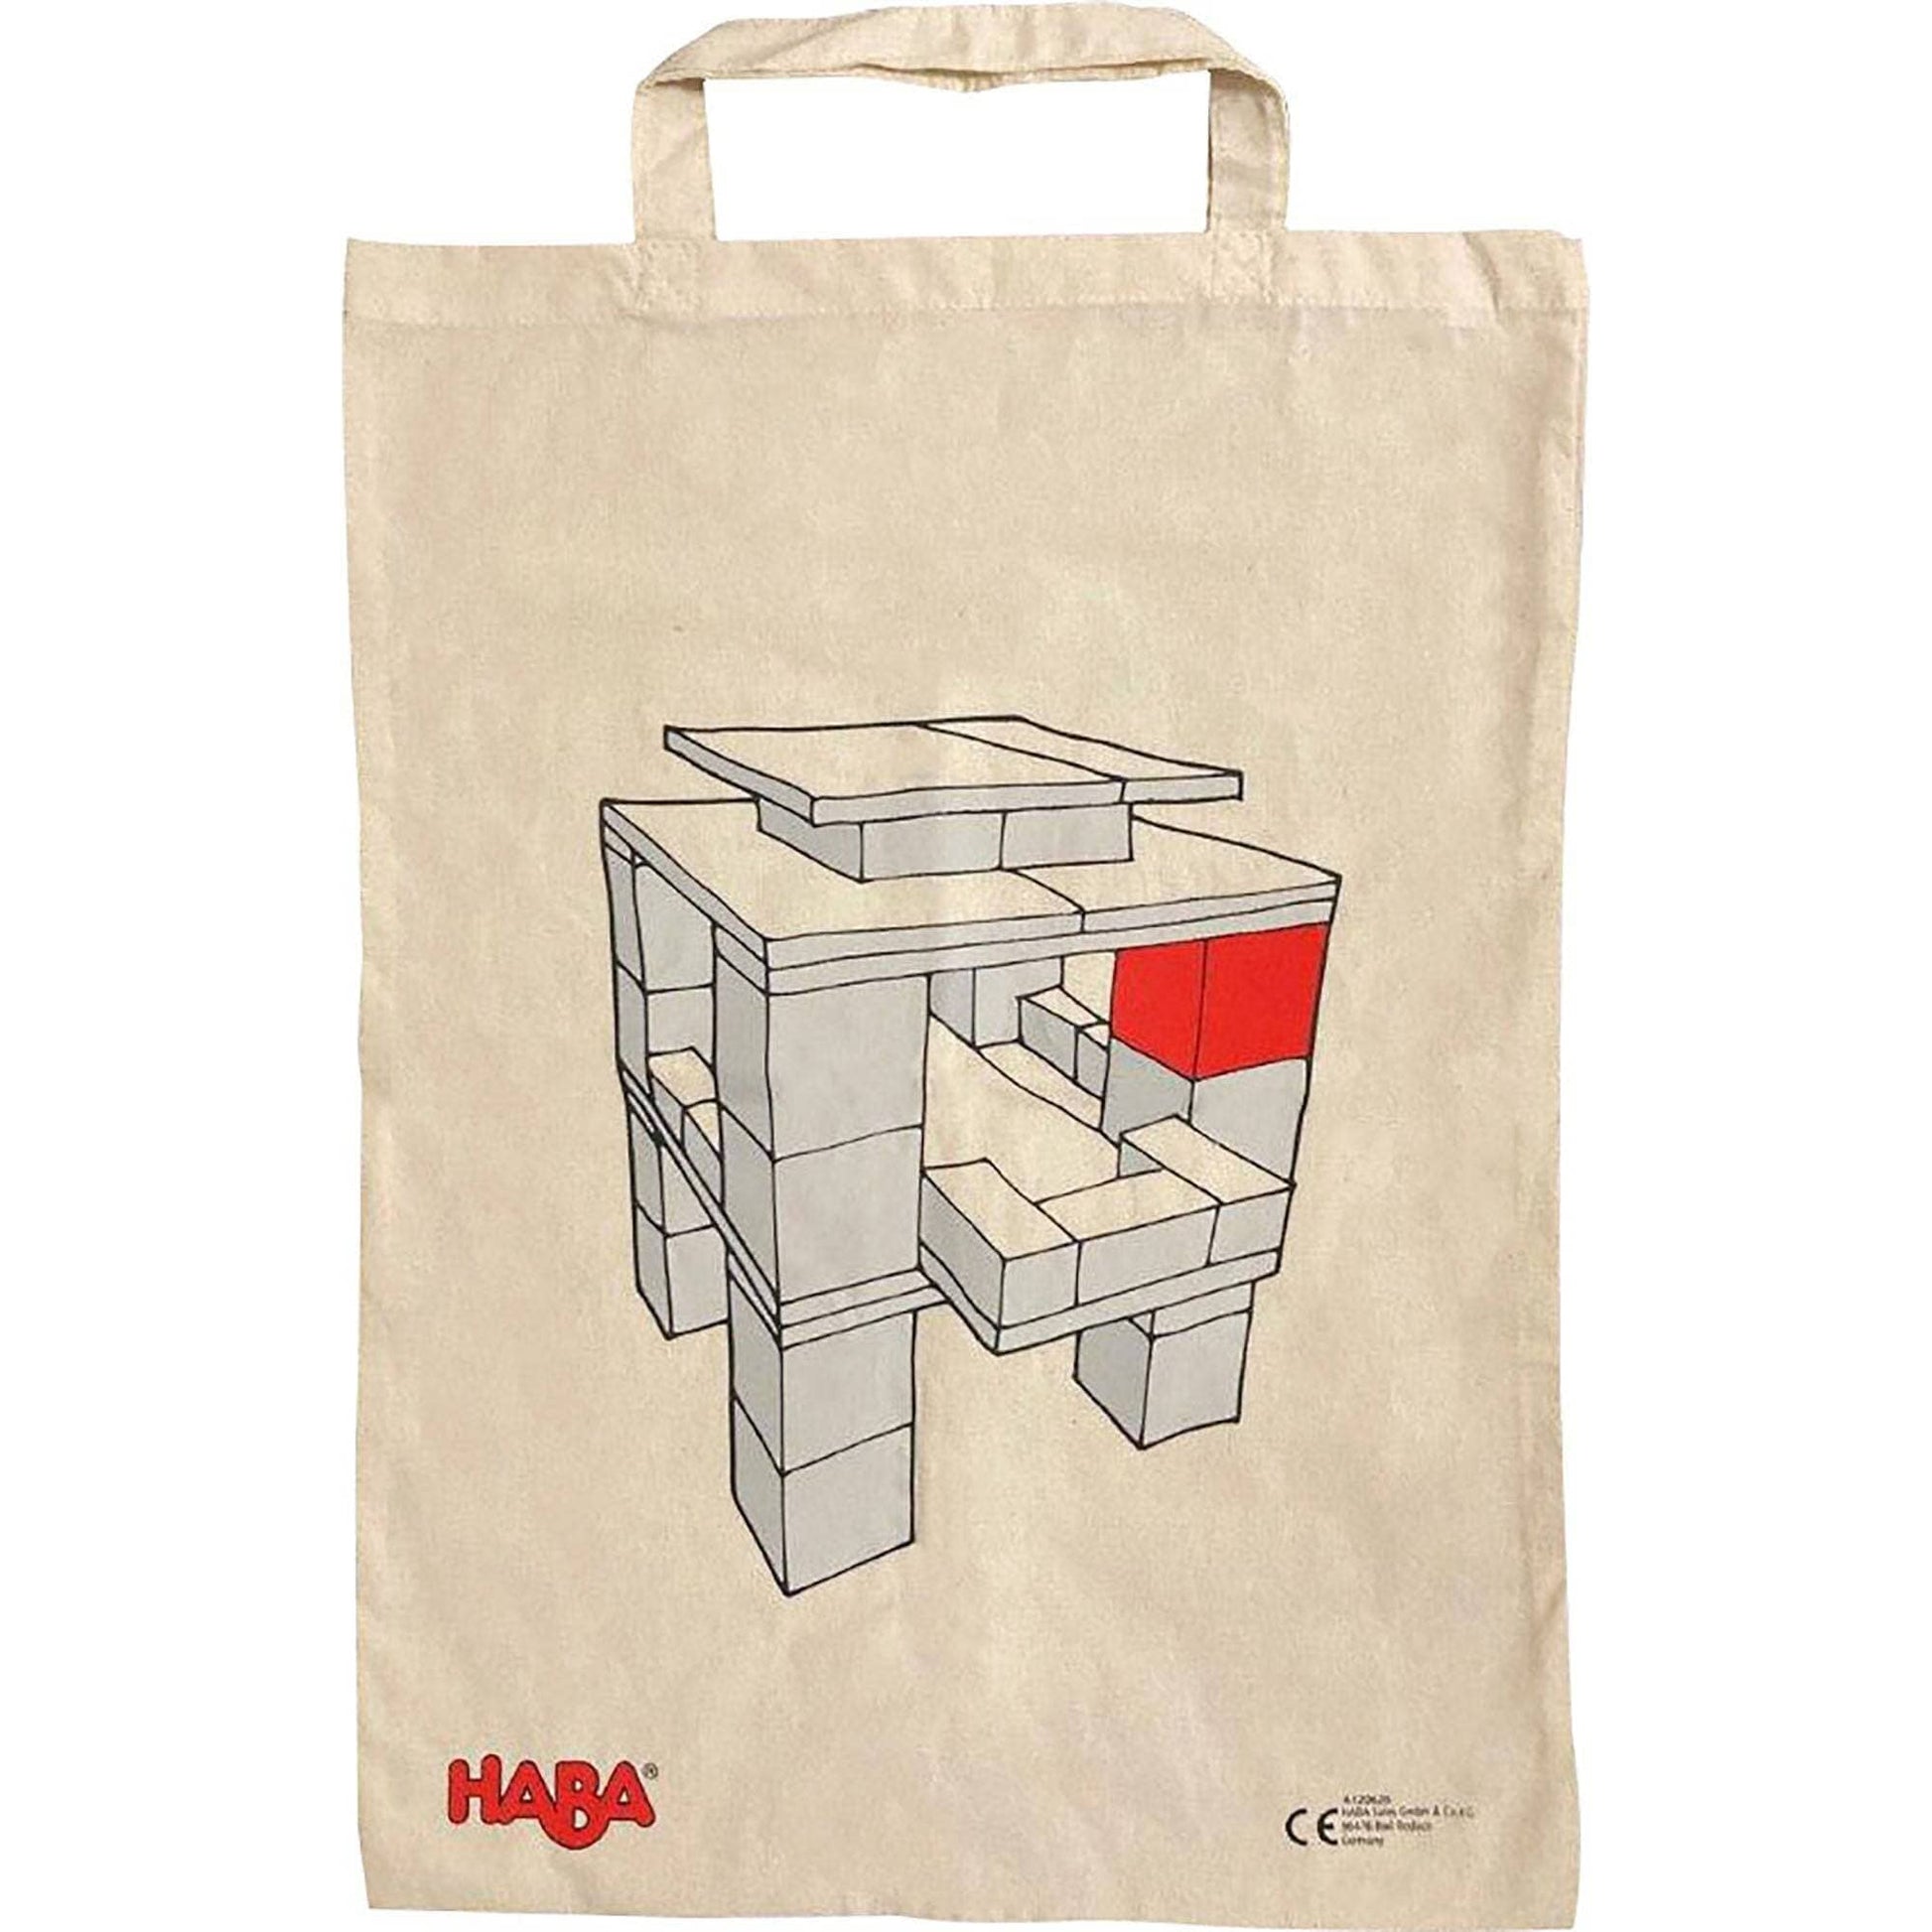 HABA Clever Up! Building Block System 3.0 Blocks 